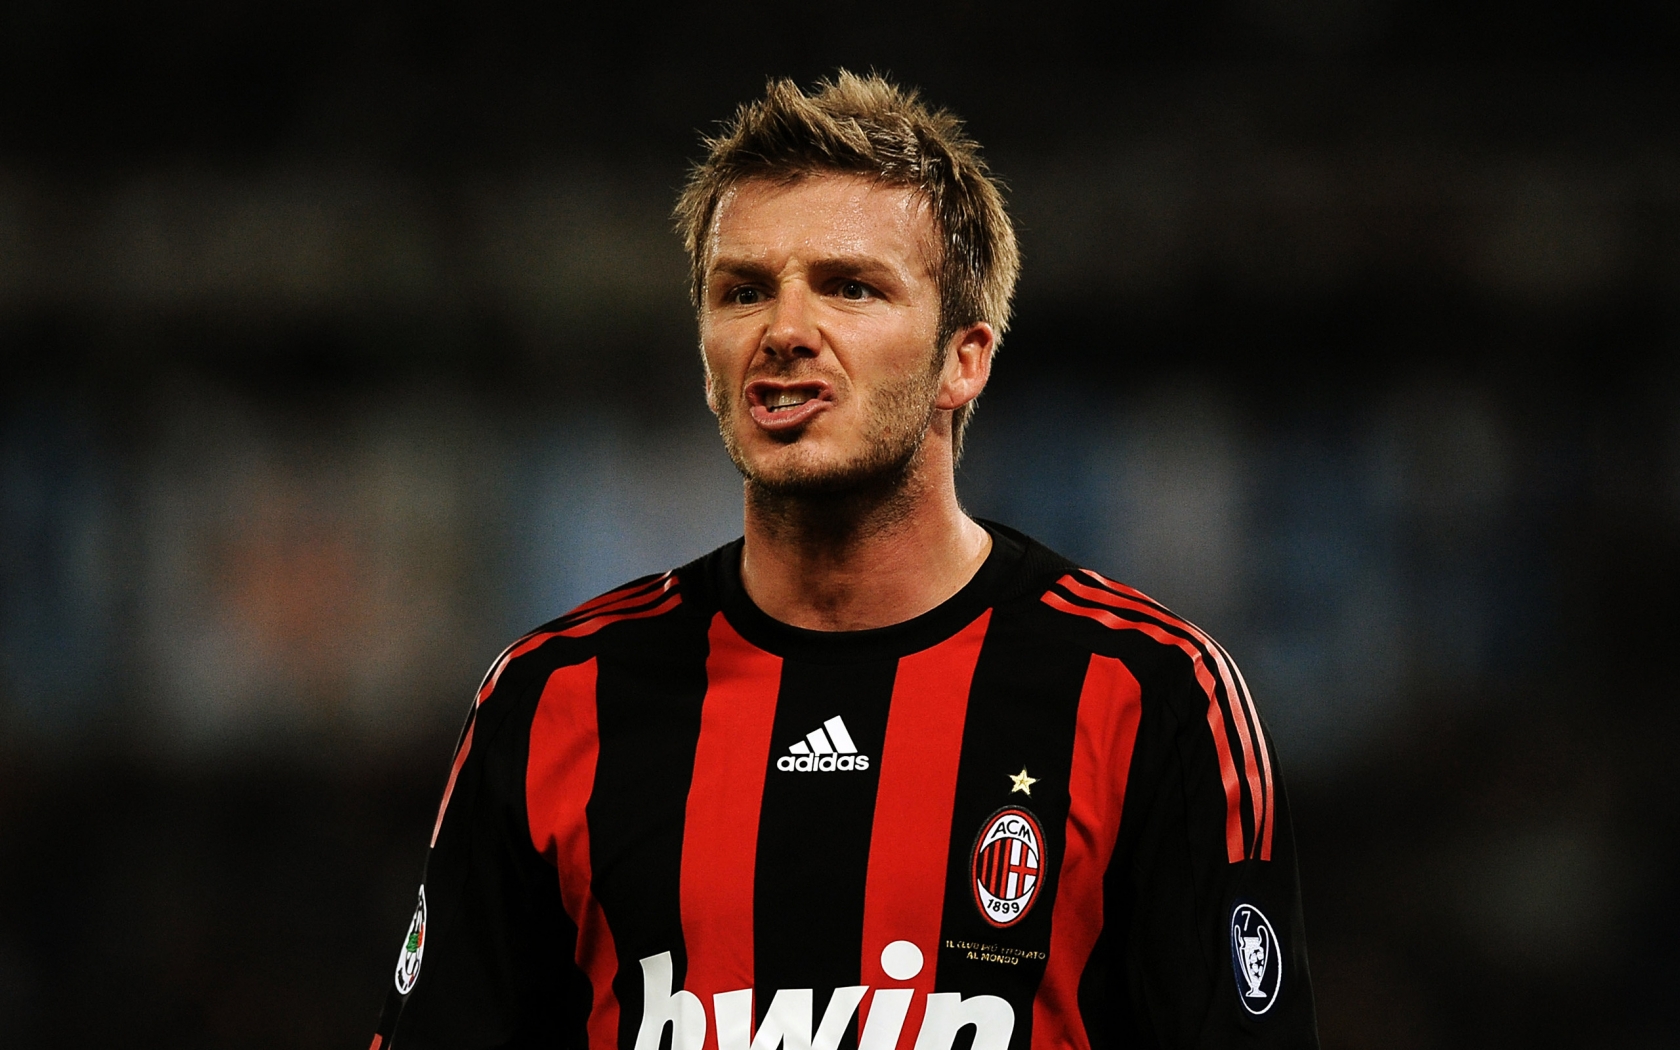 Angry David Beckham for 1680 x 1050 widescreen resolution